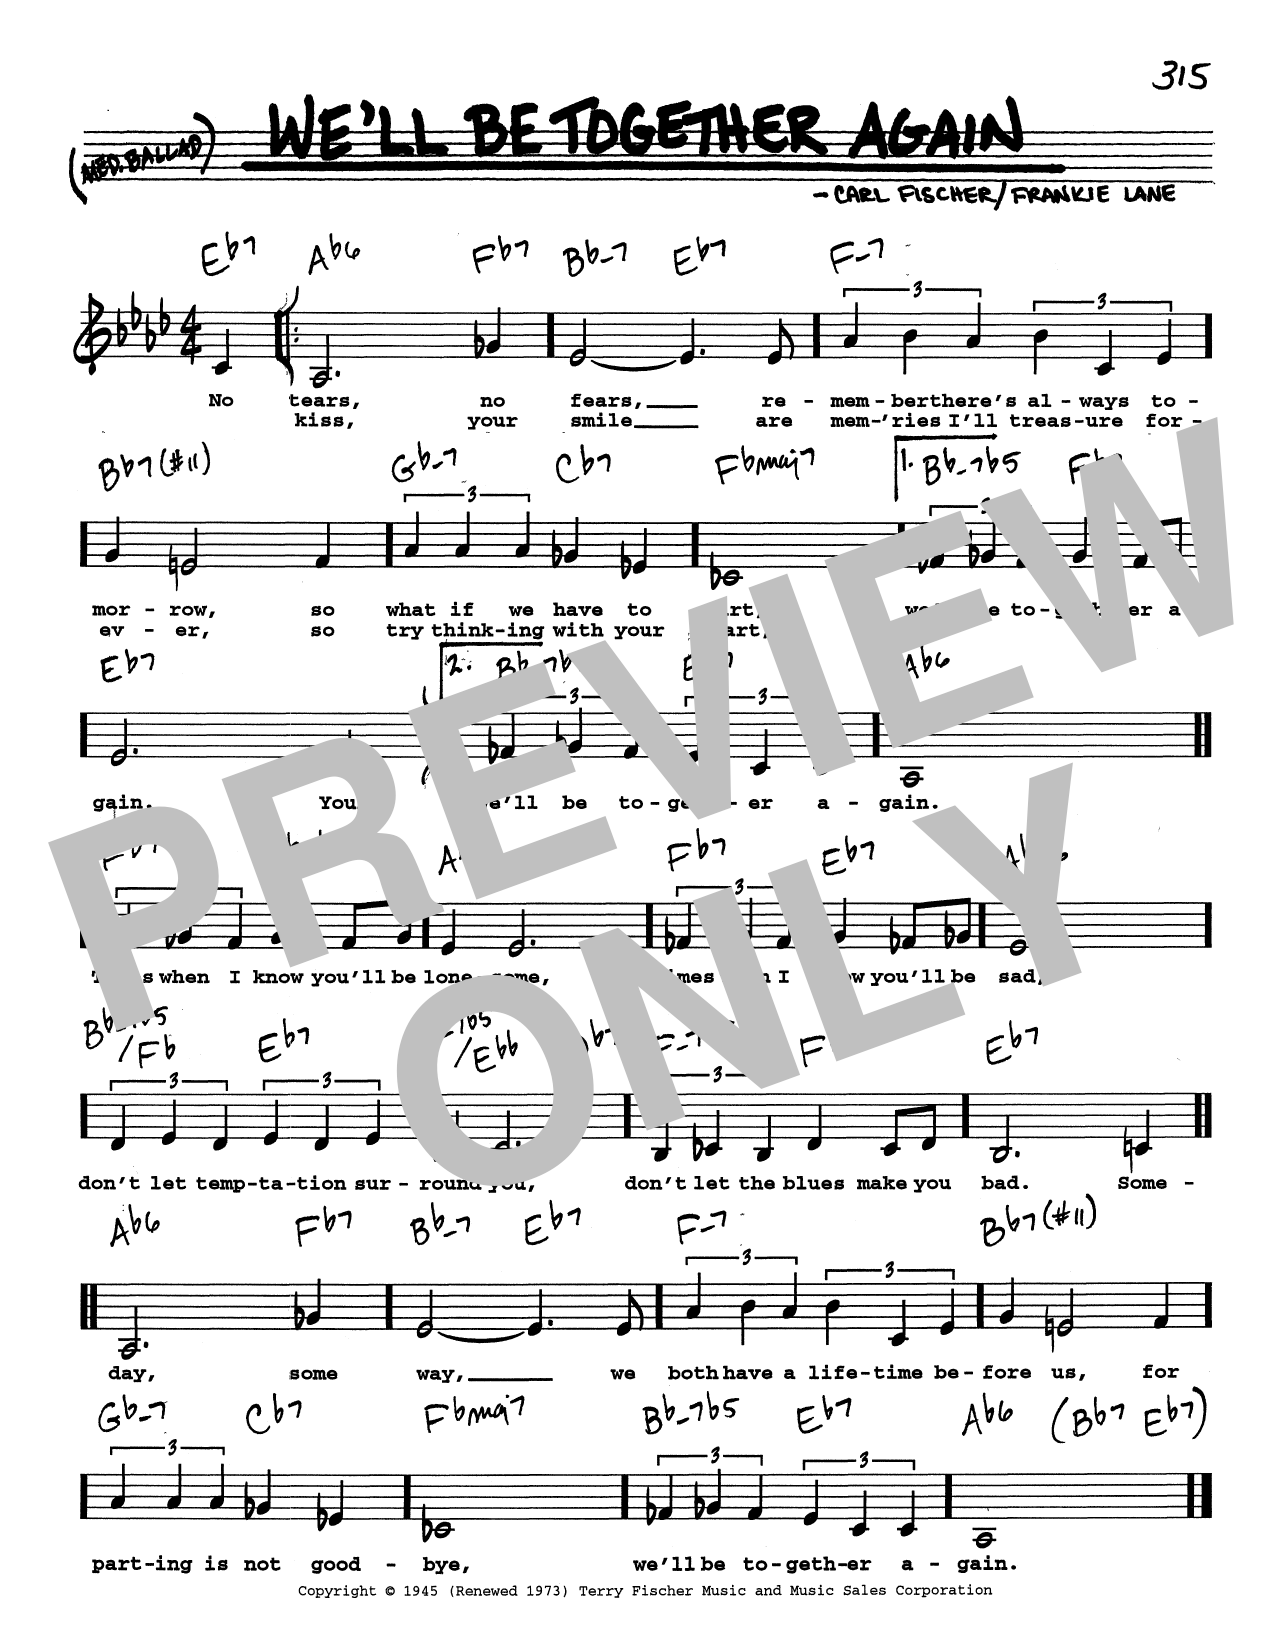 Carl Fischer We'll Be Together Again (Low Voice) sheet music notes printable PDF score